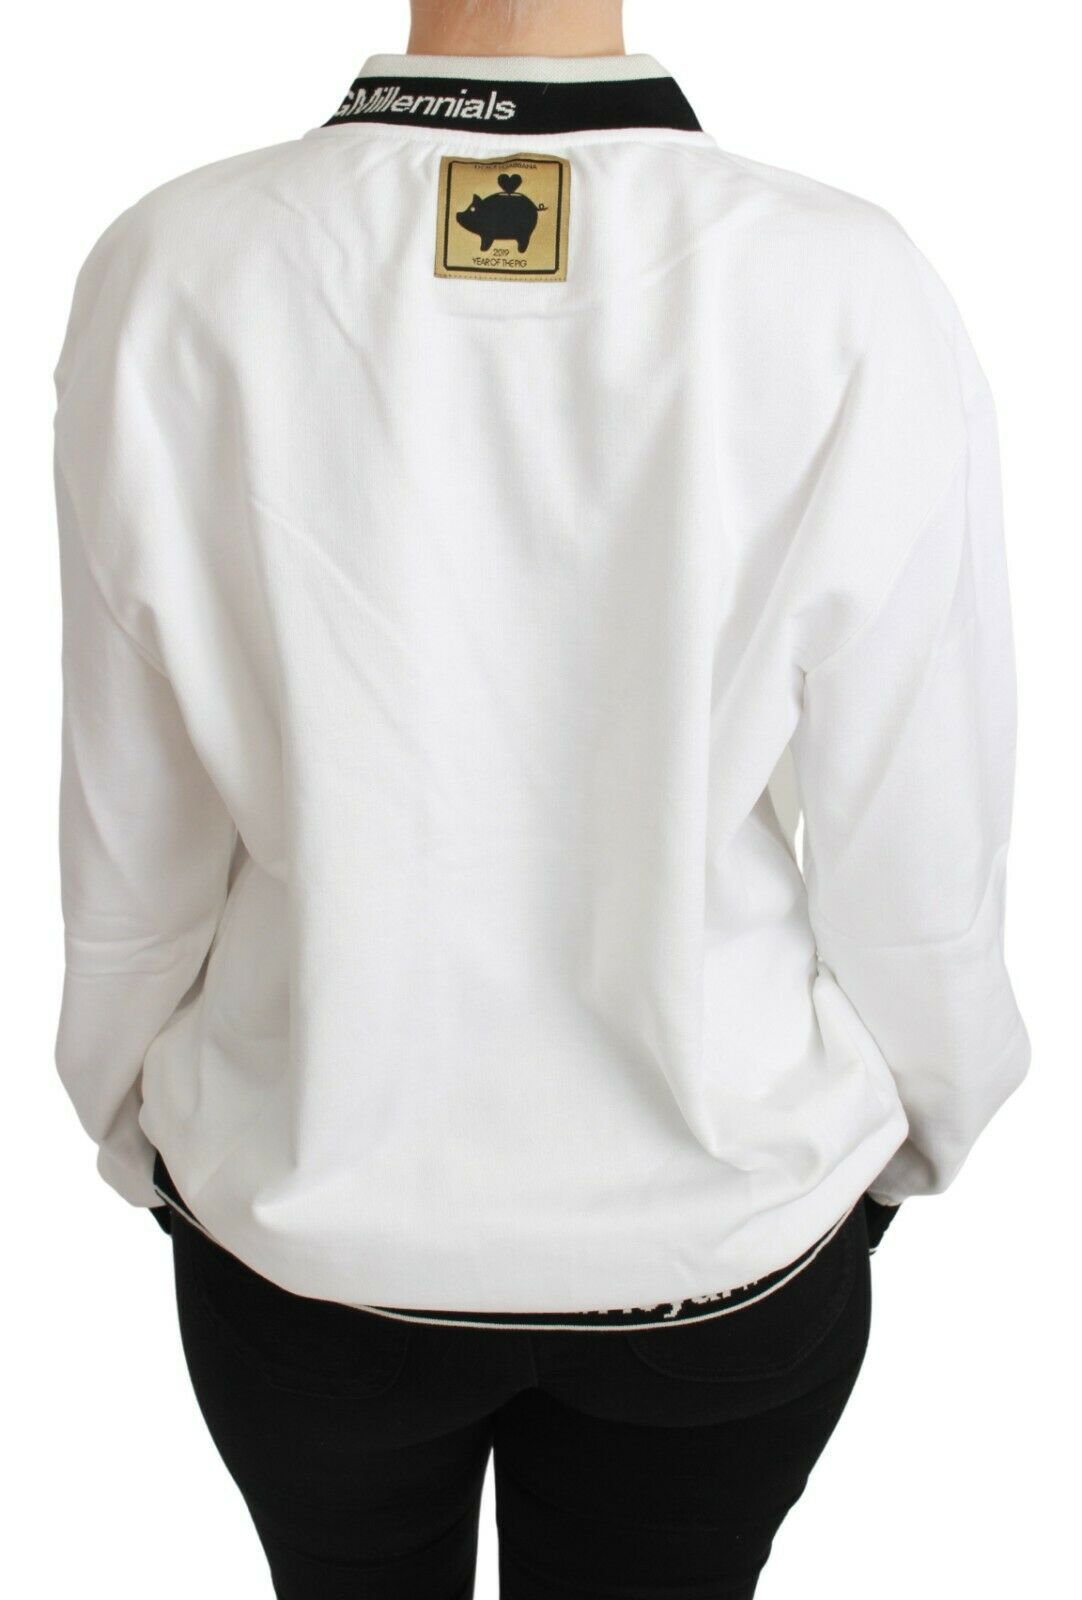 Dolce & Gabbana White Pig of the Year Pullover Sweater